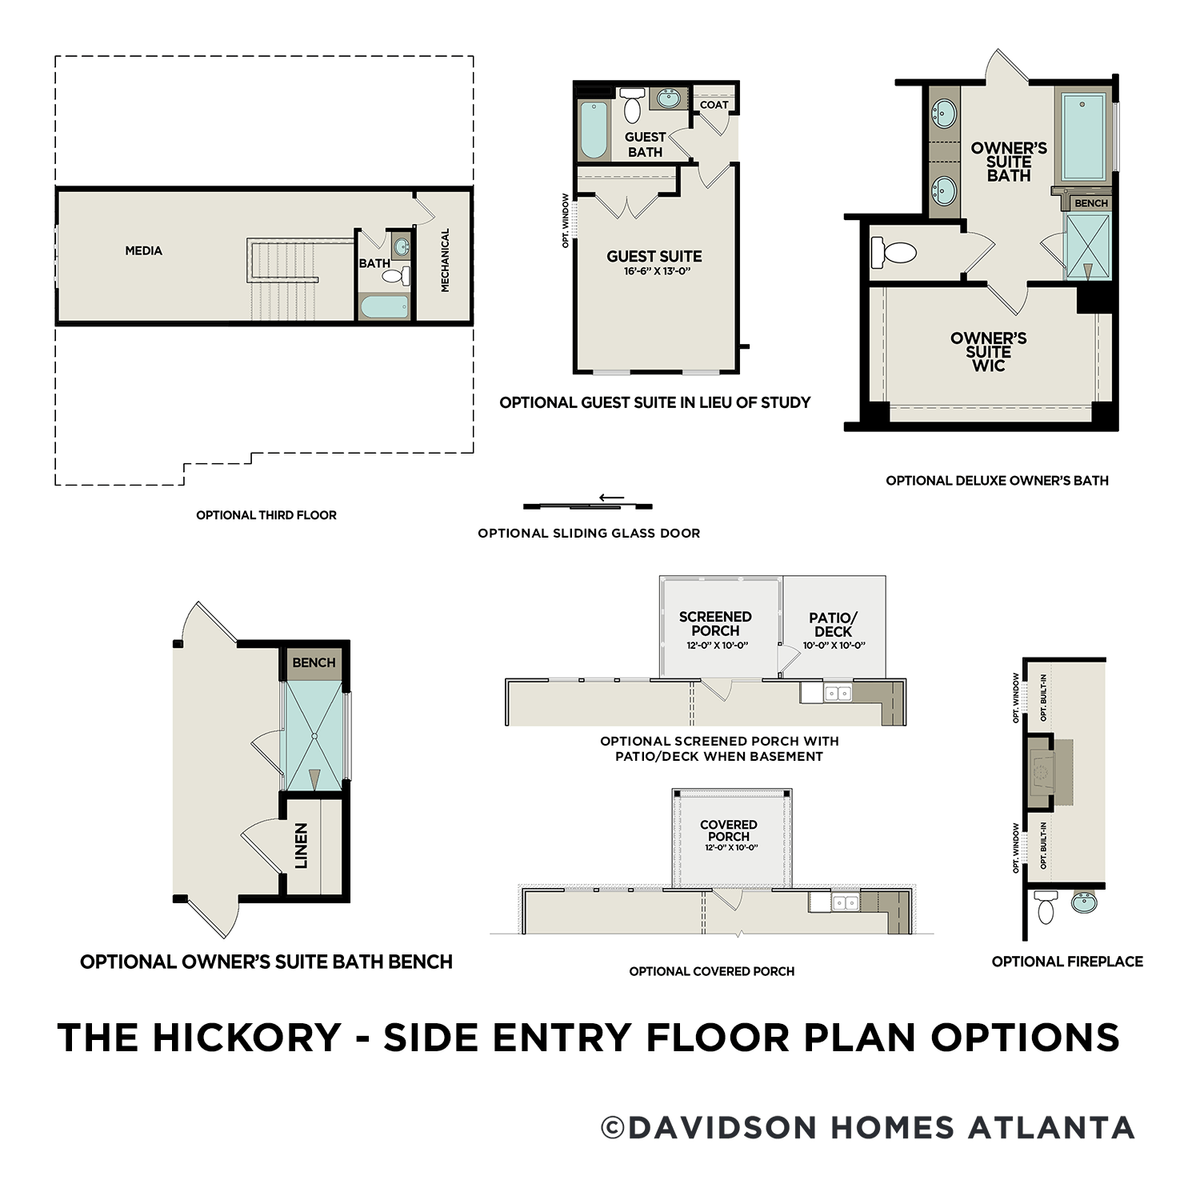 3 - The Hickory A – Side Entry buildable floor plan layout in Davidson Homes' Mountainbrook community.